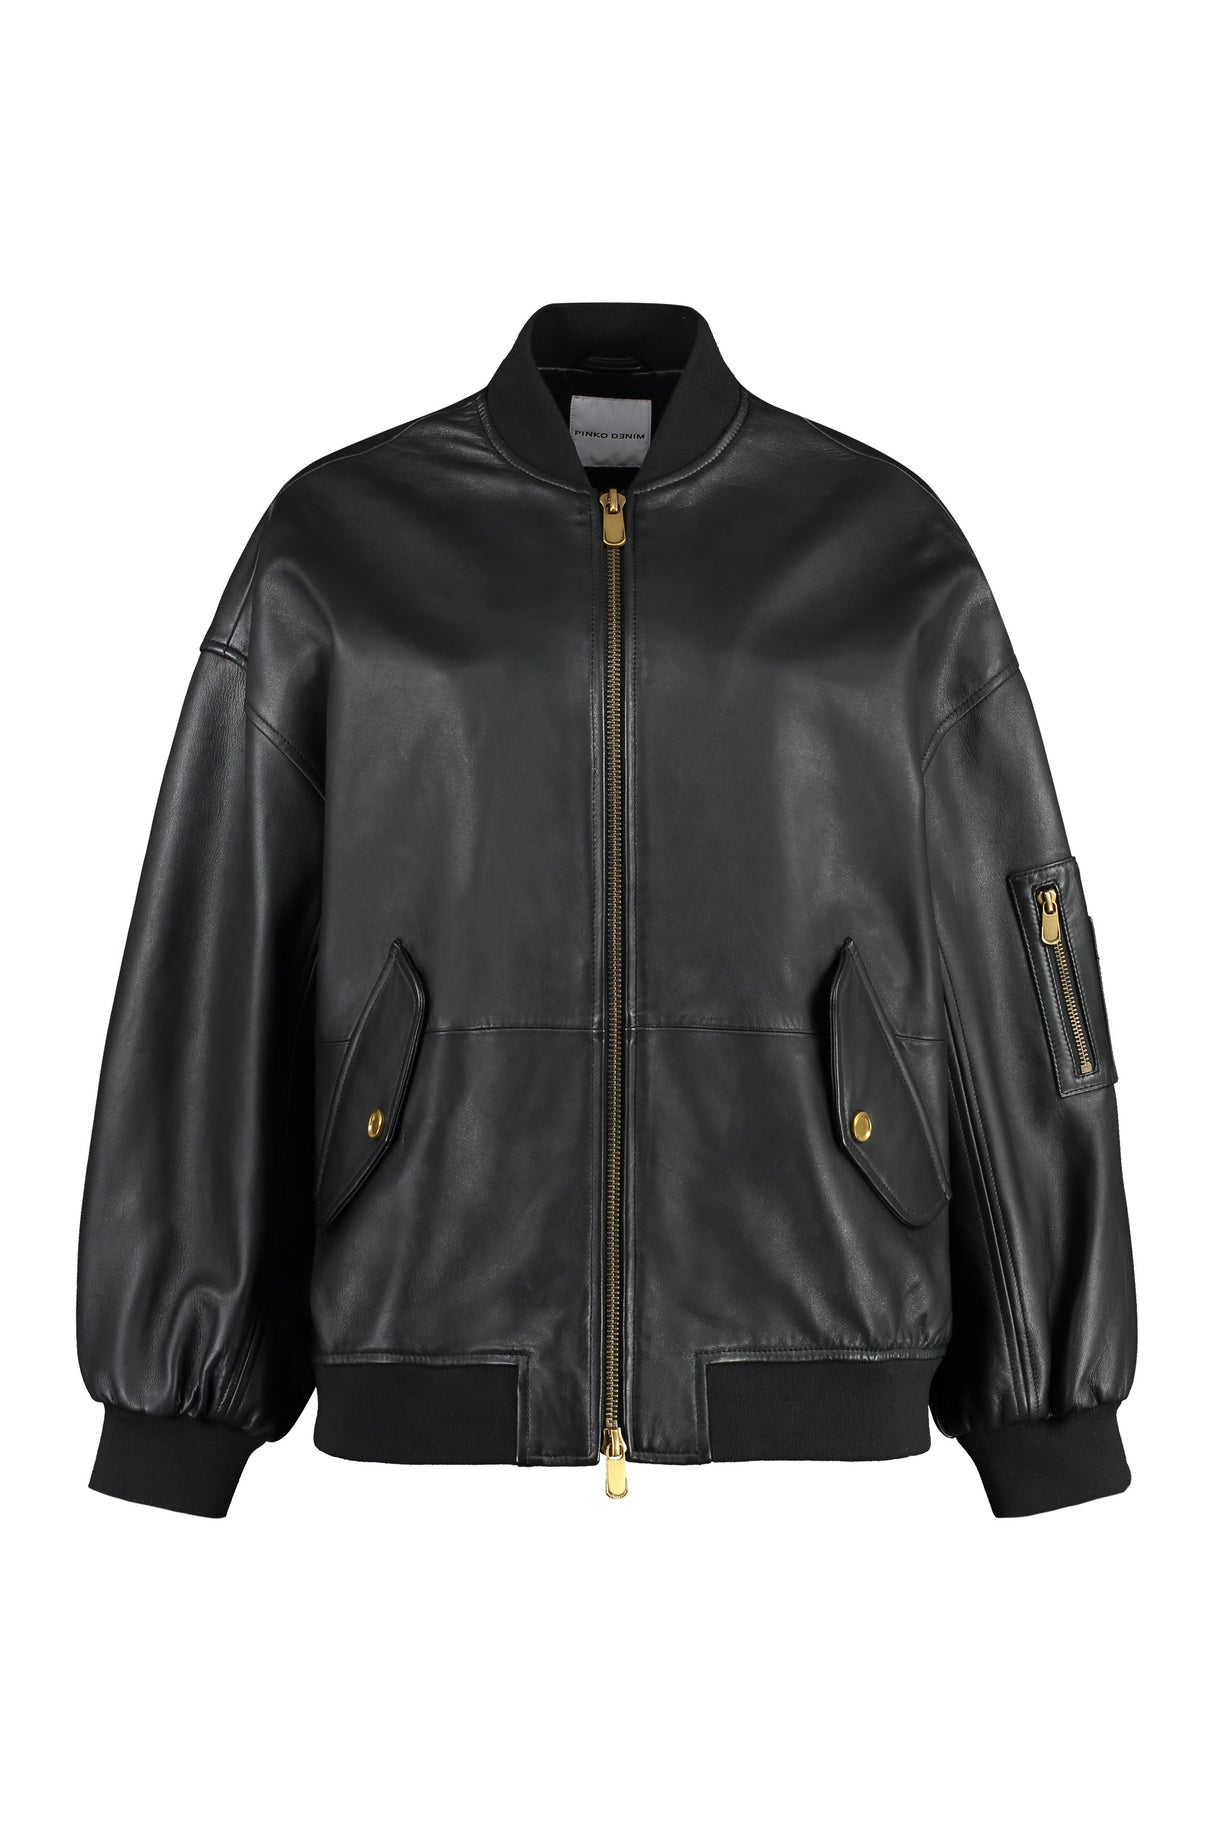 Black Leather Jacket with Zippered Pocket and Ribbed Edges